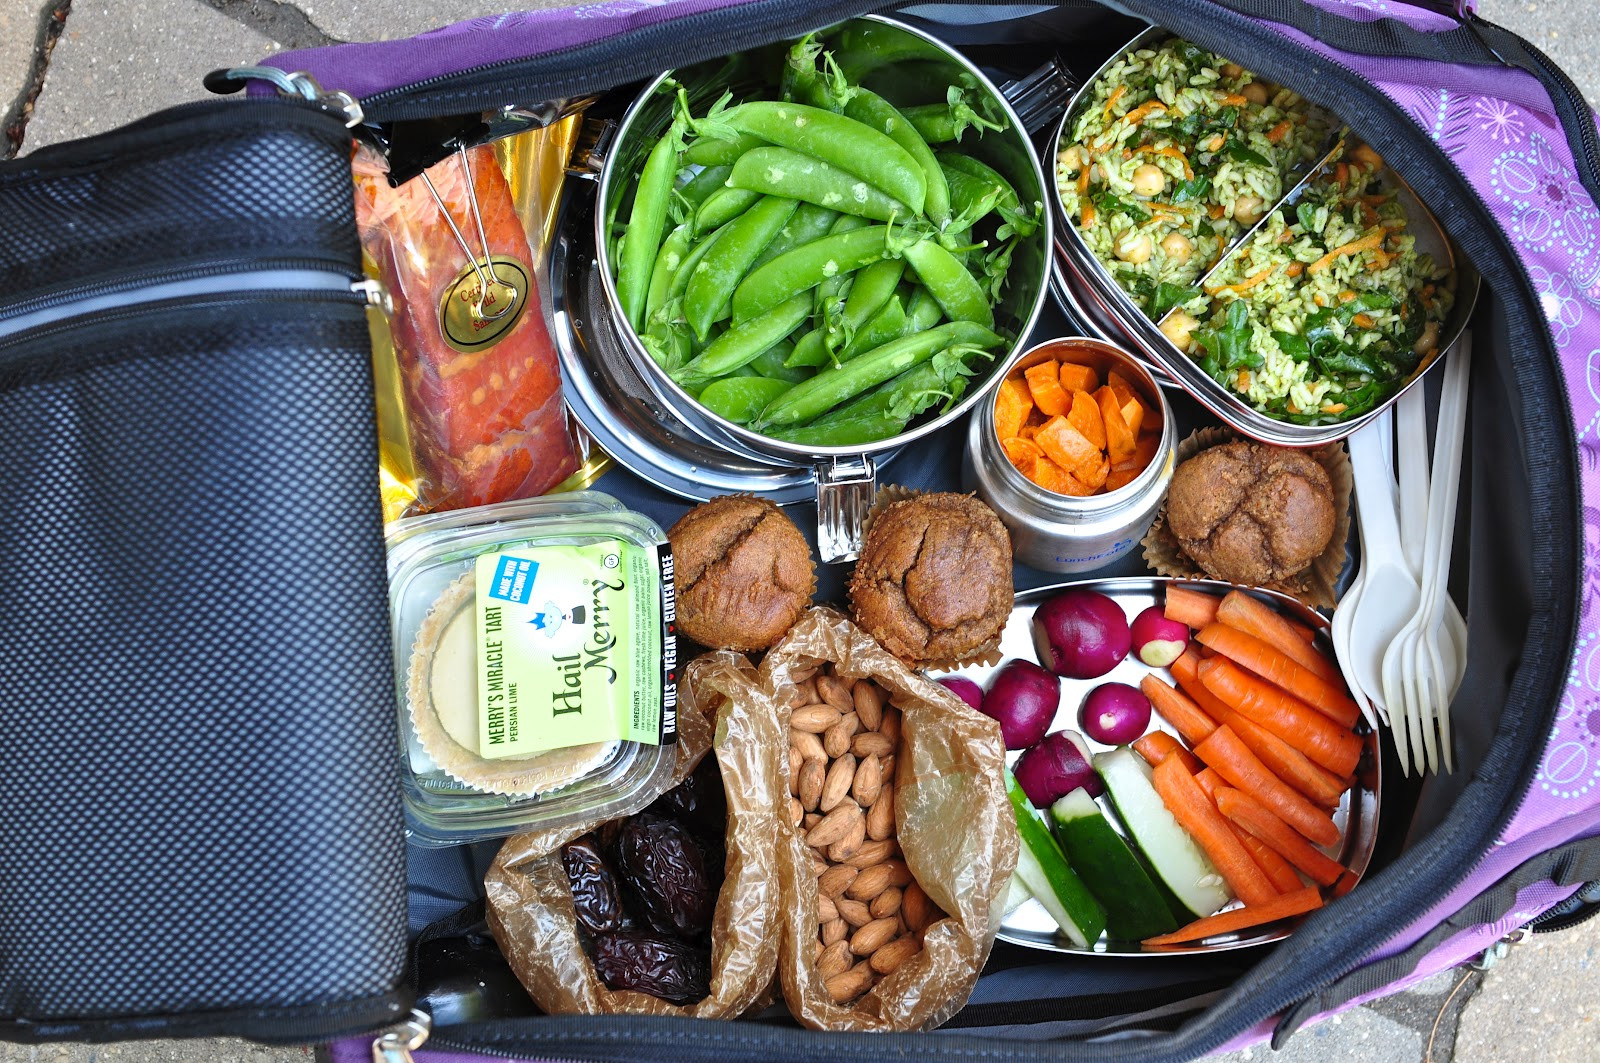 Healthy Airplane Snacks
 Nourishing Meals Packing Healthy Food for Air Travel